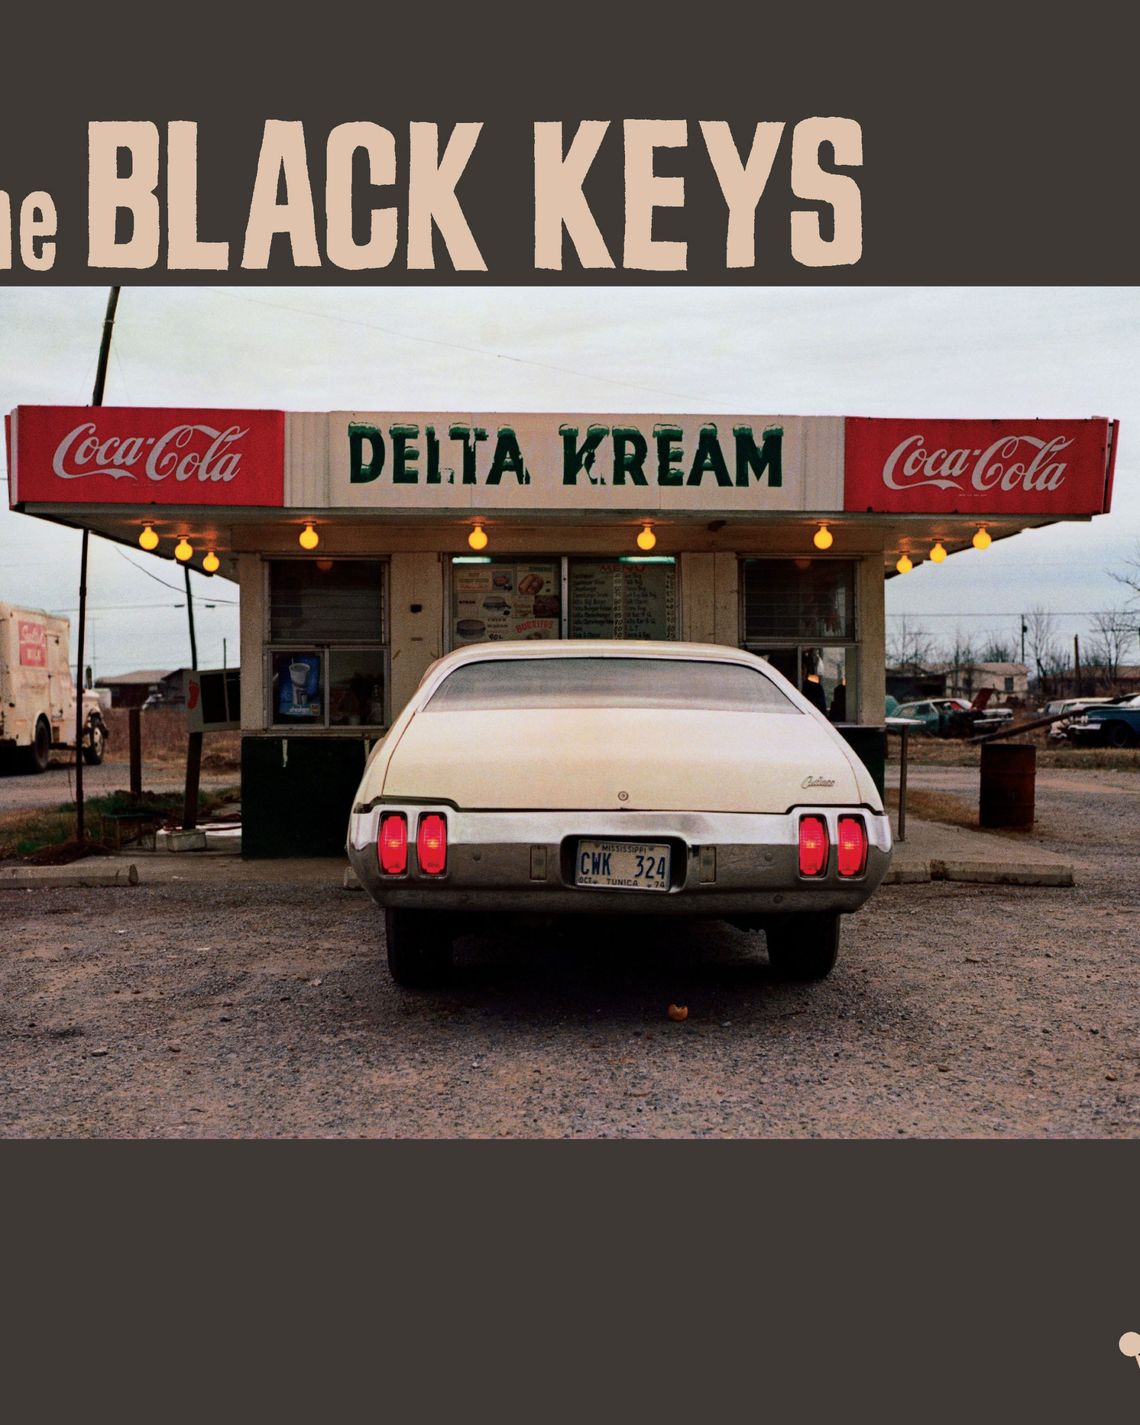 Interview: The Black Keys rediscover their blues roots, 20 years later